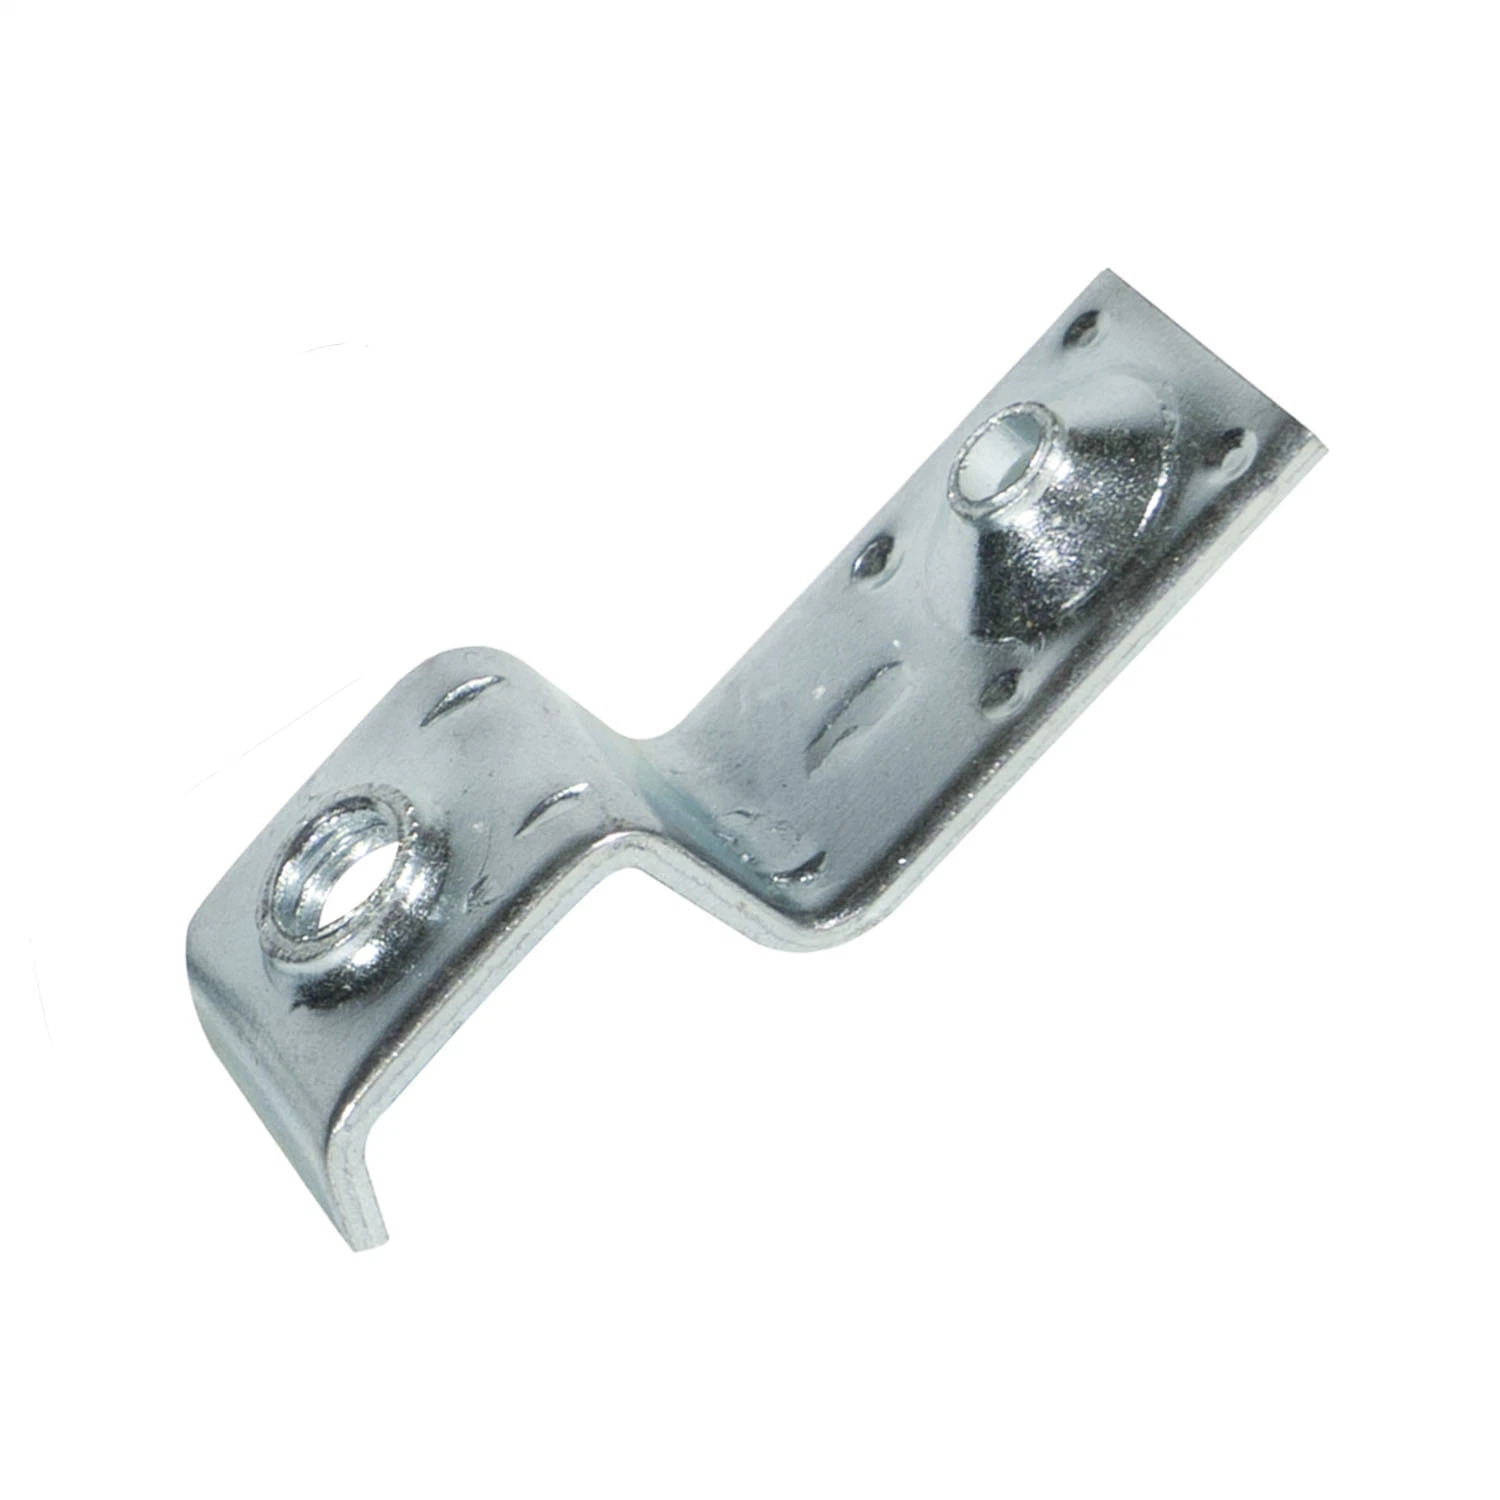 Production Non-Standard Hardware Electrical Accessories Precision Hardware Stainless Steel Tensile Stamping Part